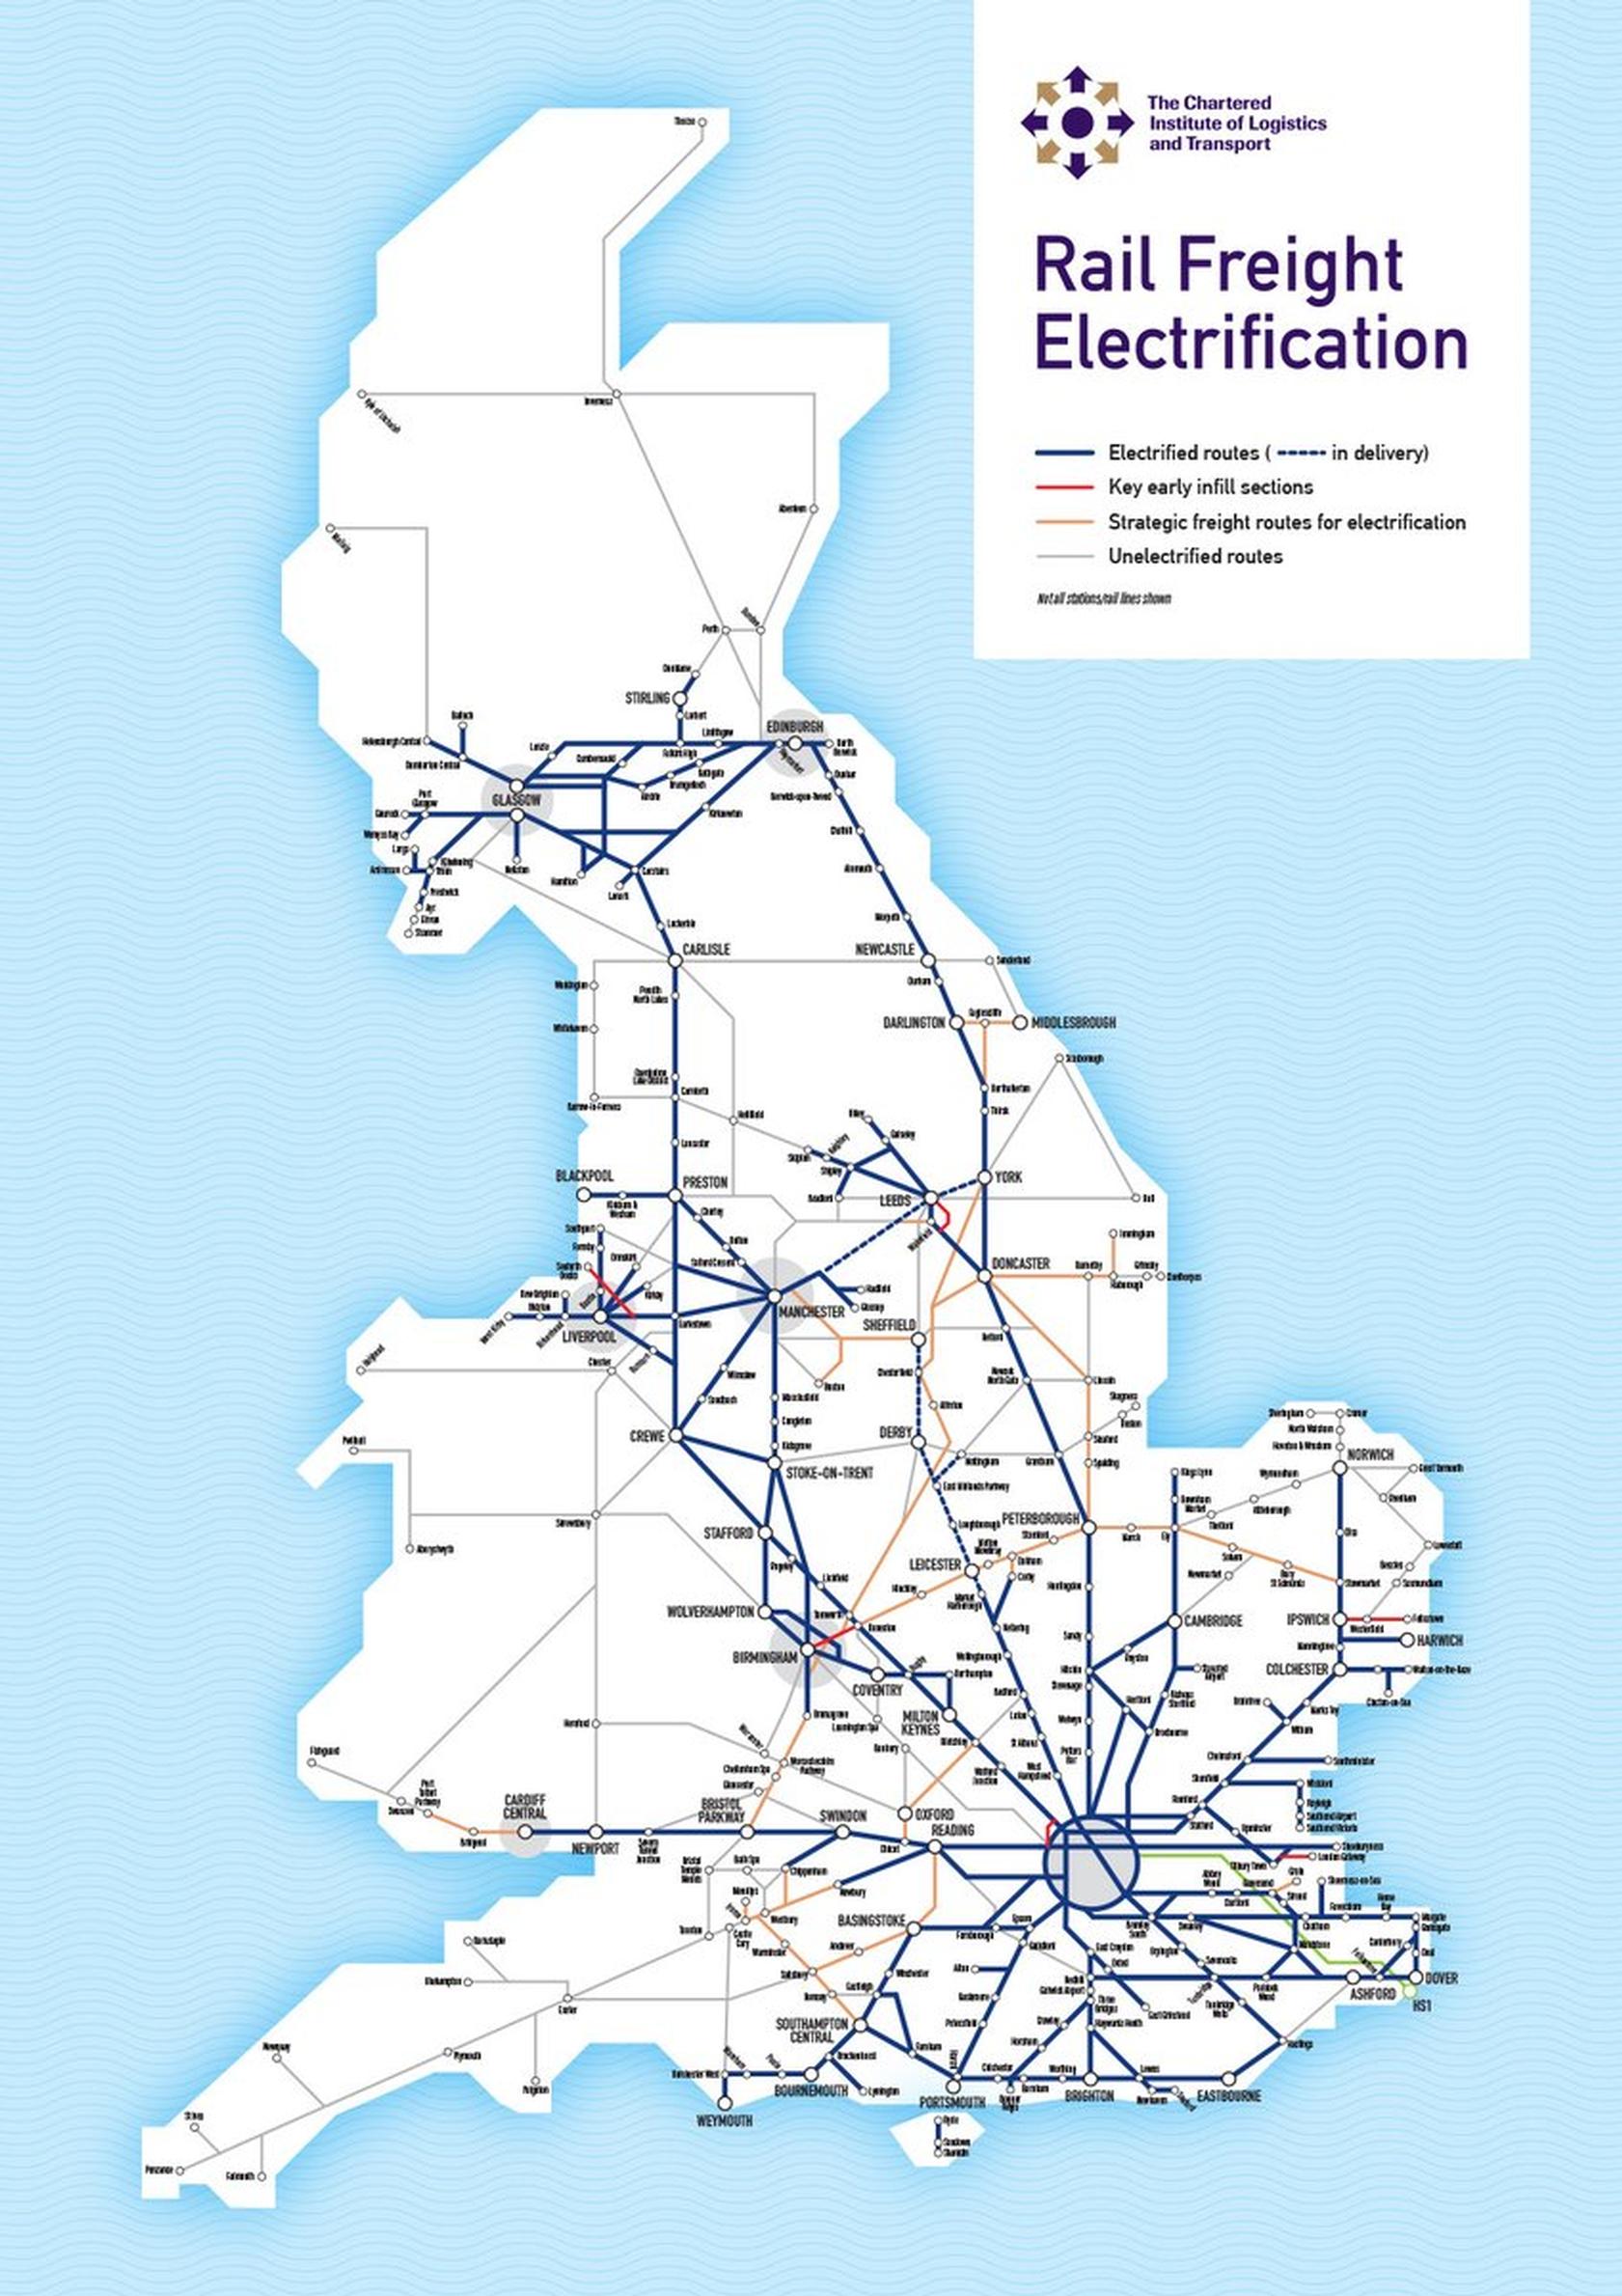 95% of UK rail freight operations could be electrified, says CILT